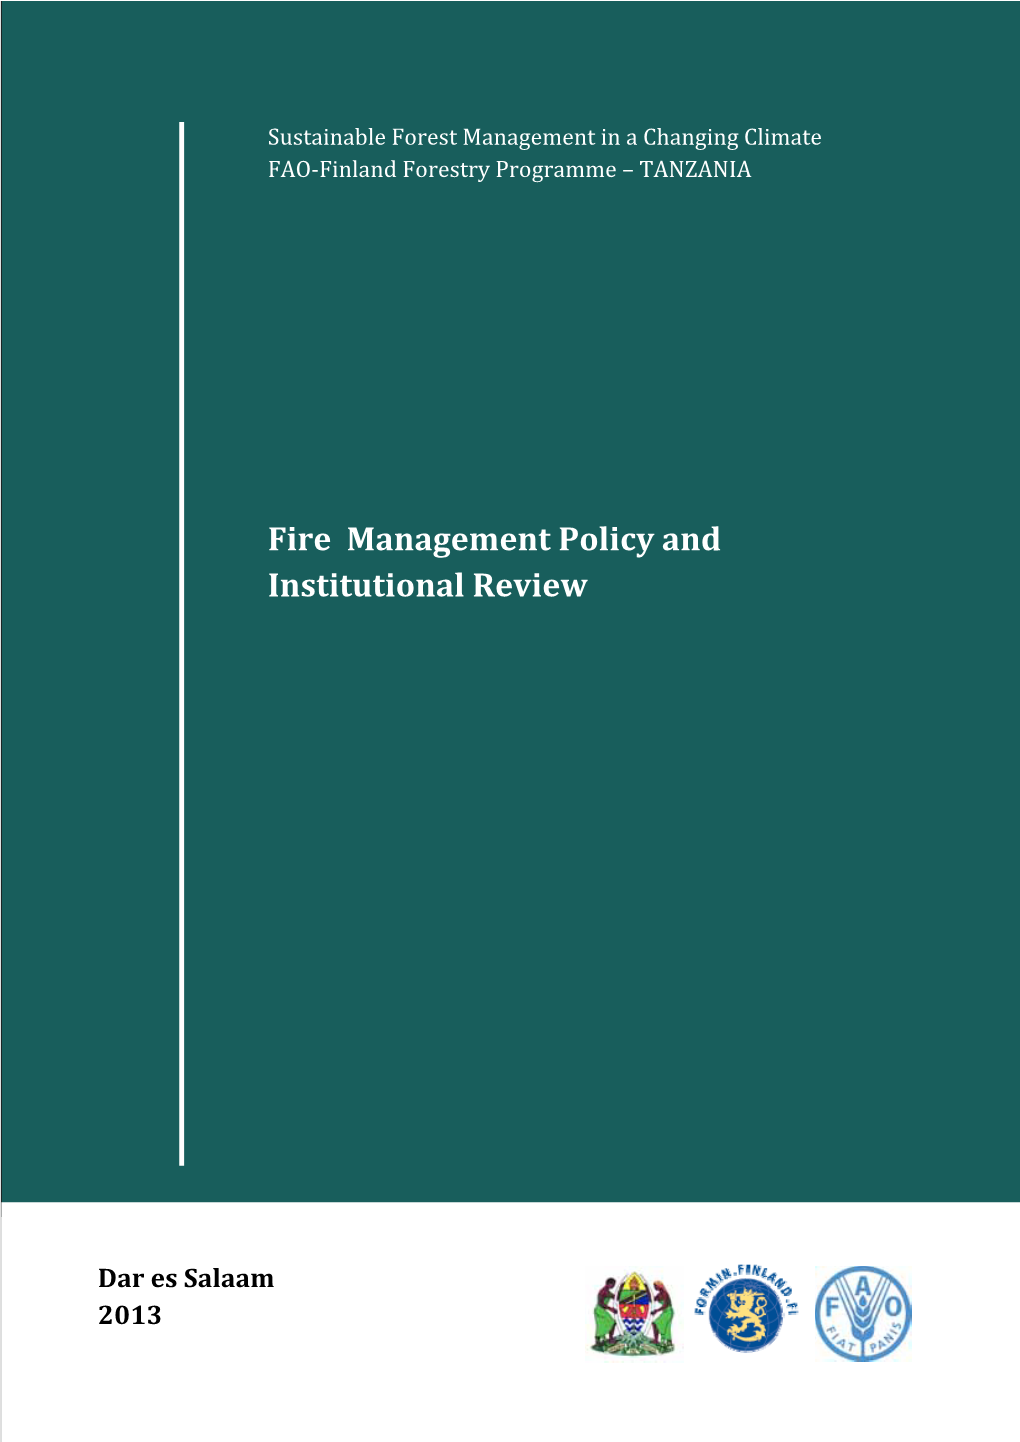 Fire Management Policy and Institutional Review